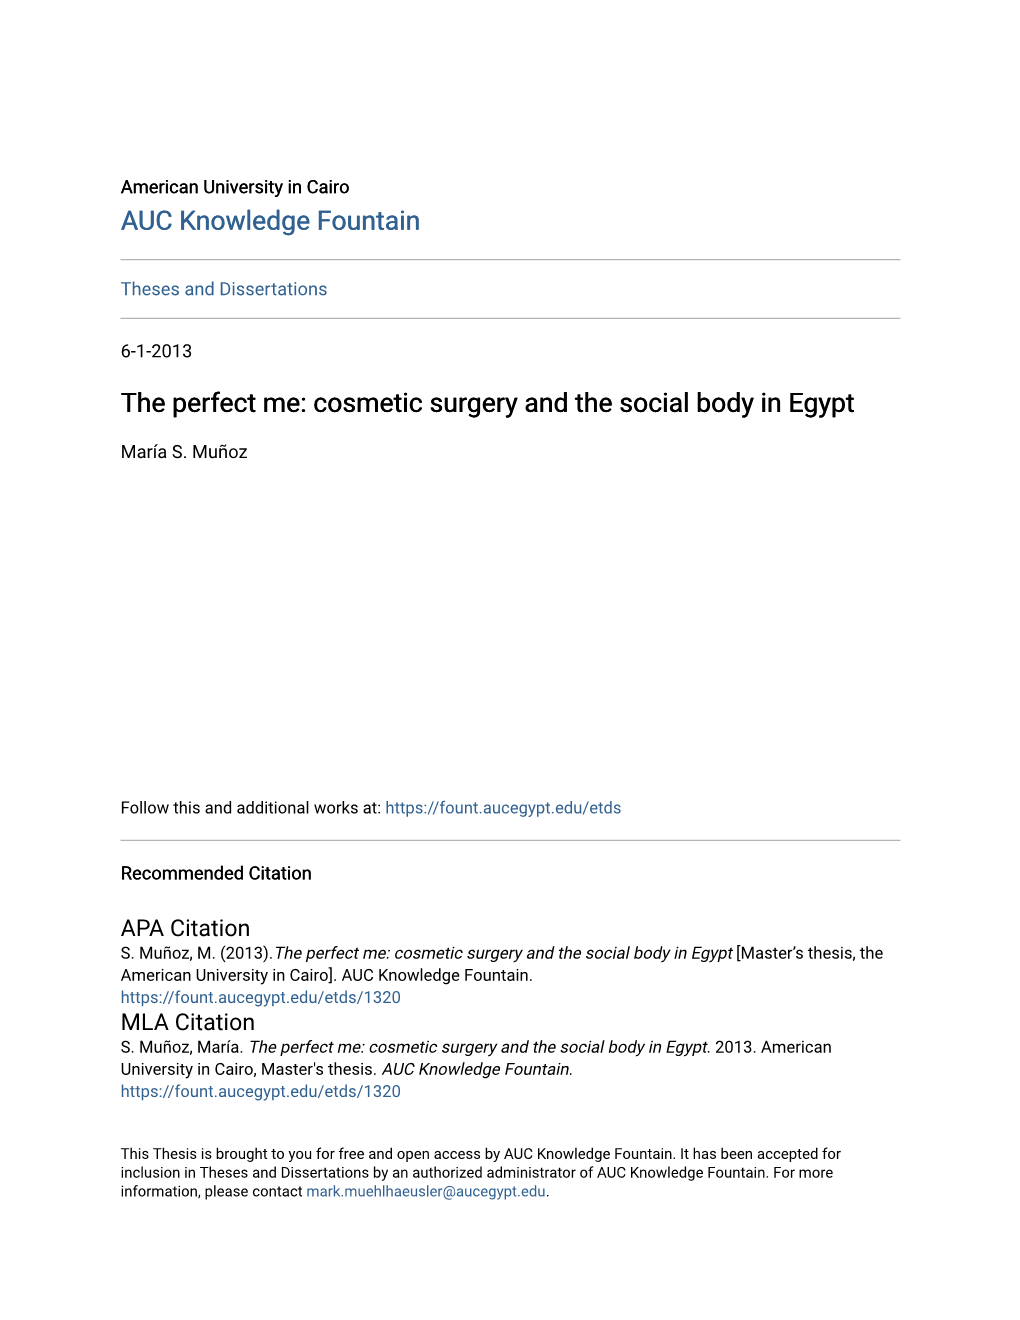 The Perfect Me: Cosmetic Surgery and the Social Body in Egypt